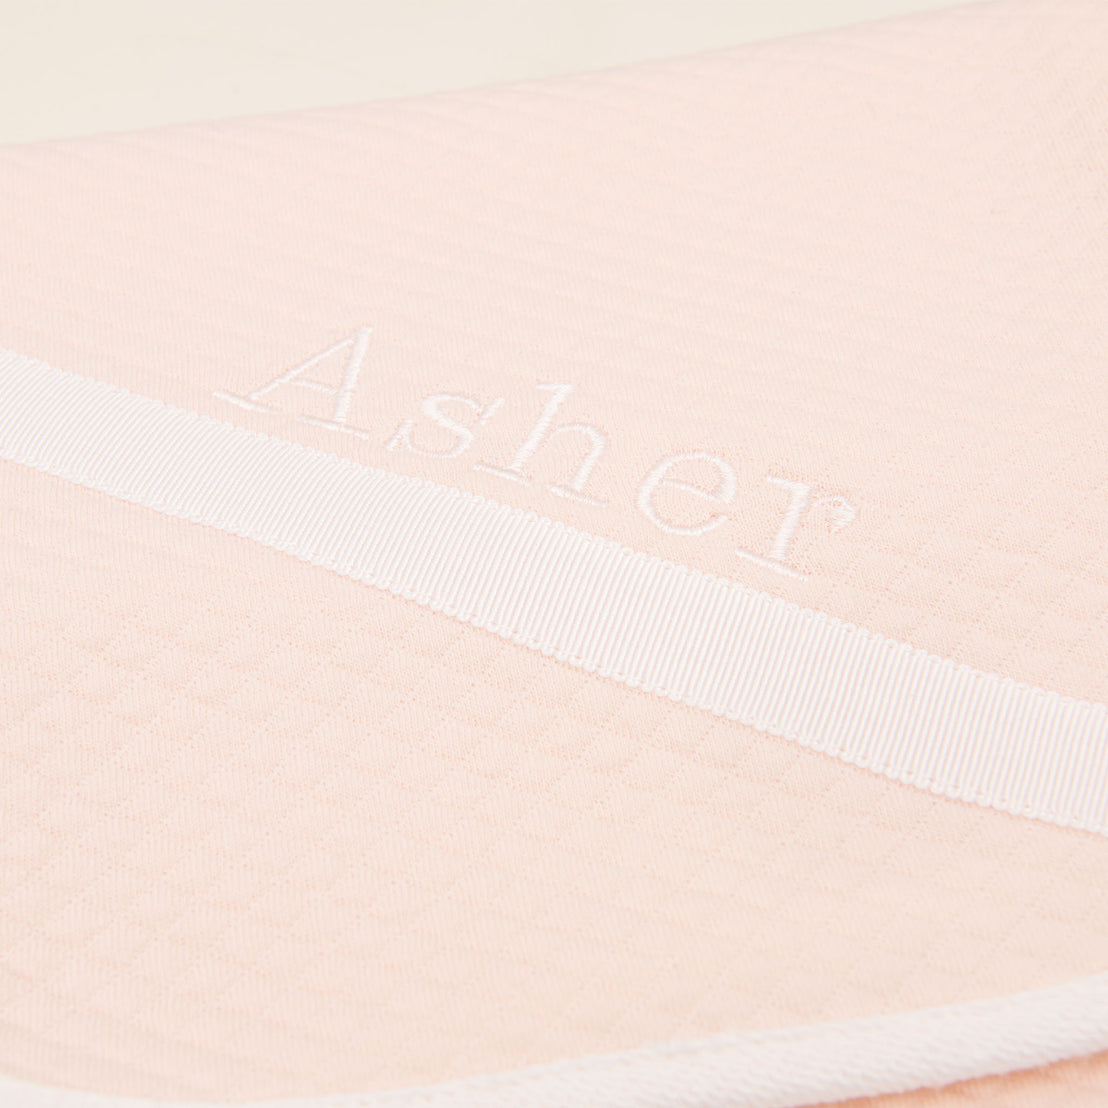 Asher Personalized Blanket